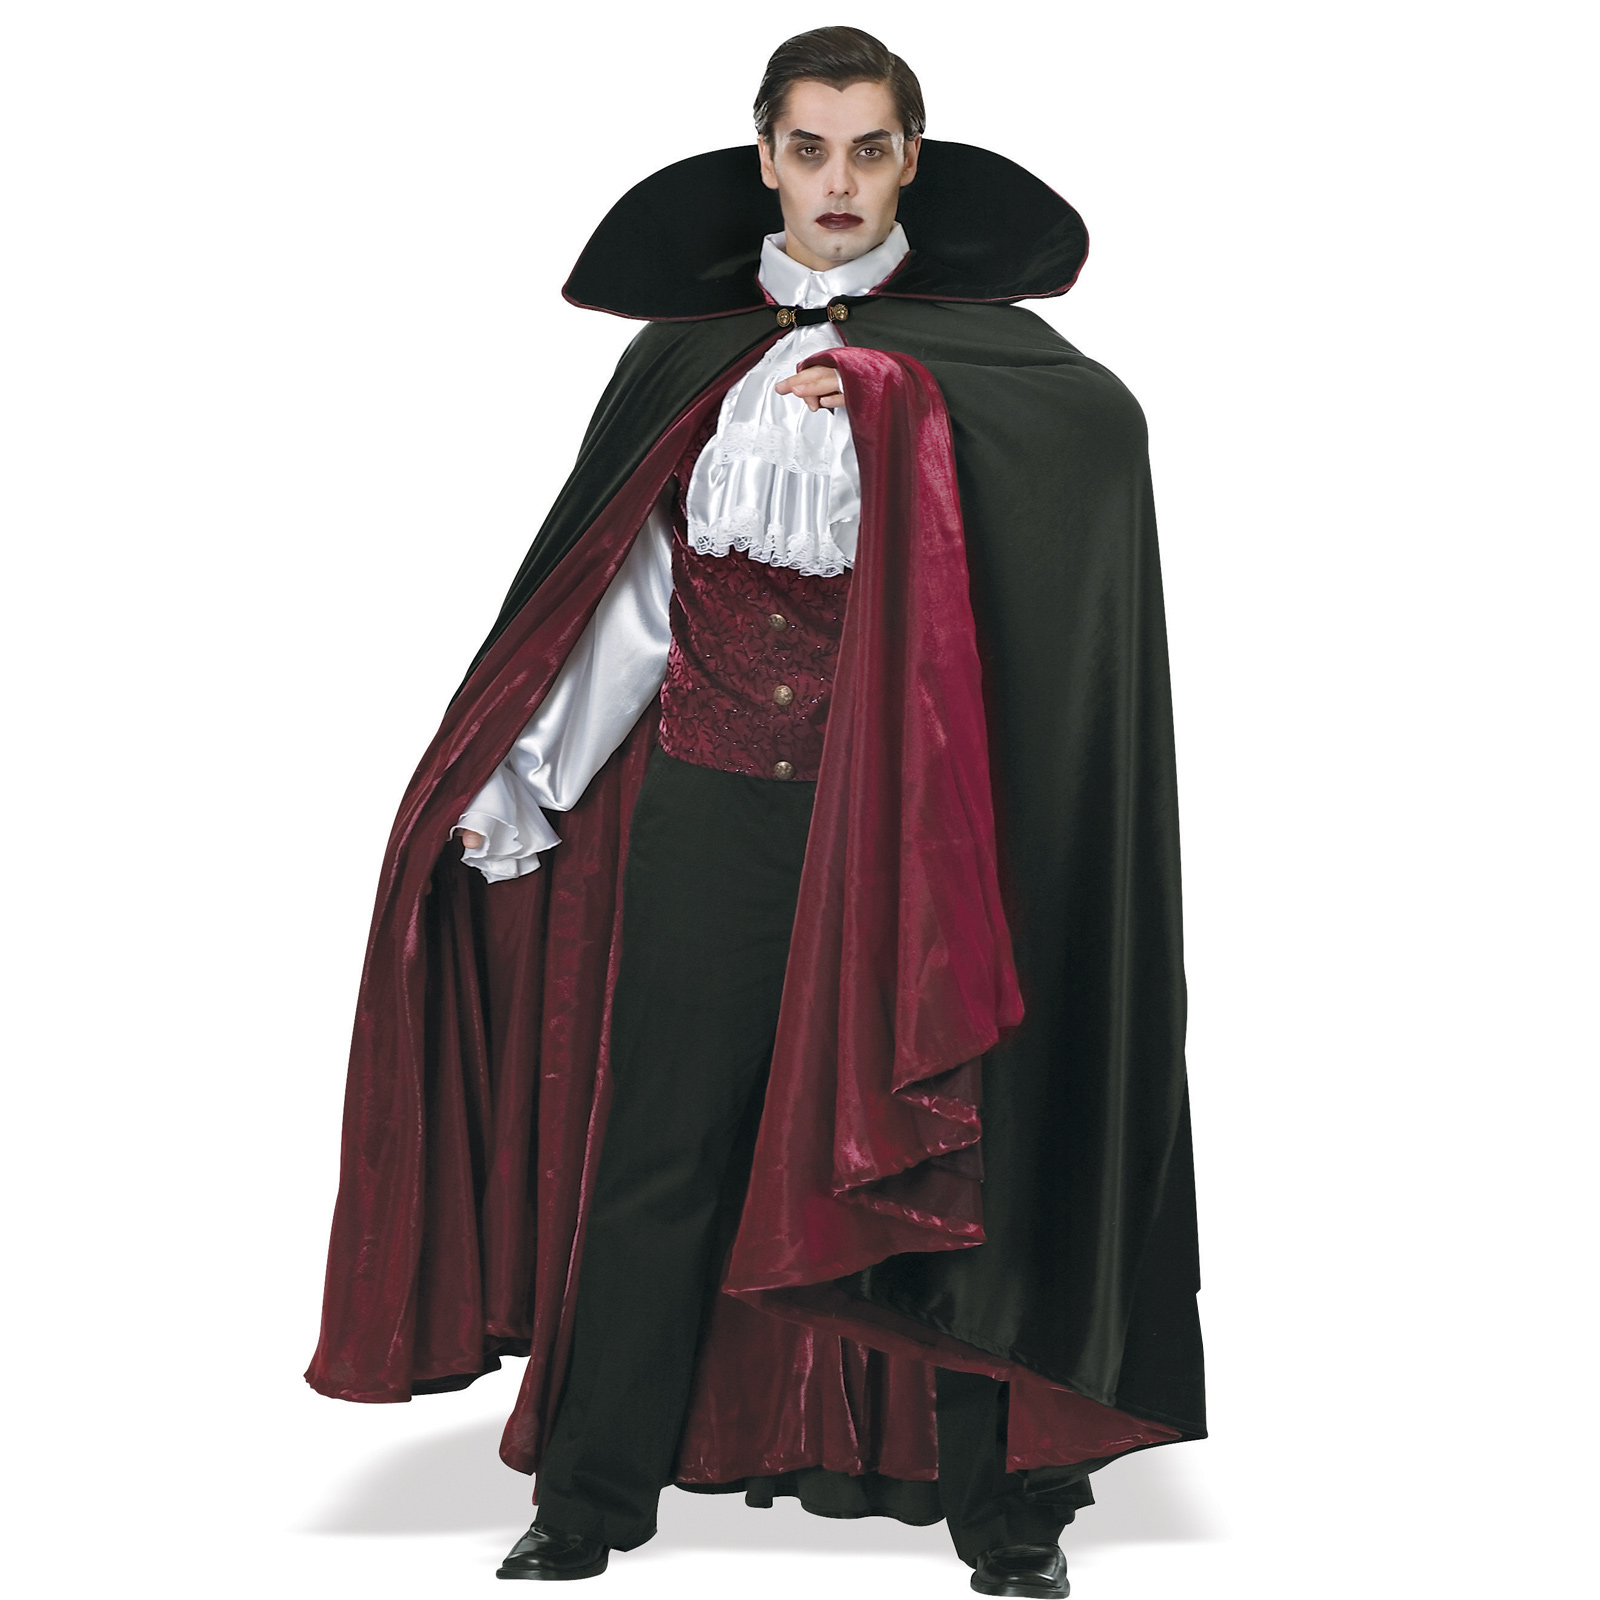 Rubie's Costume Co Men's Count of Transylvania Grand Heritage Collection Adult Costume - Standard